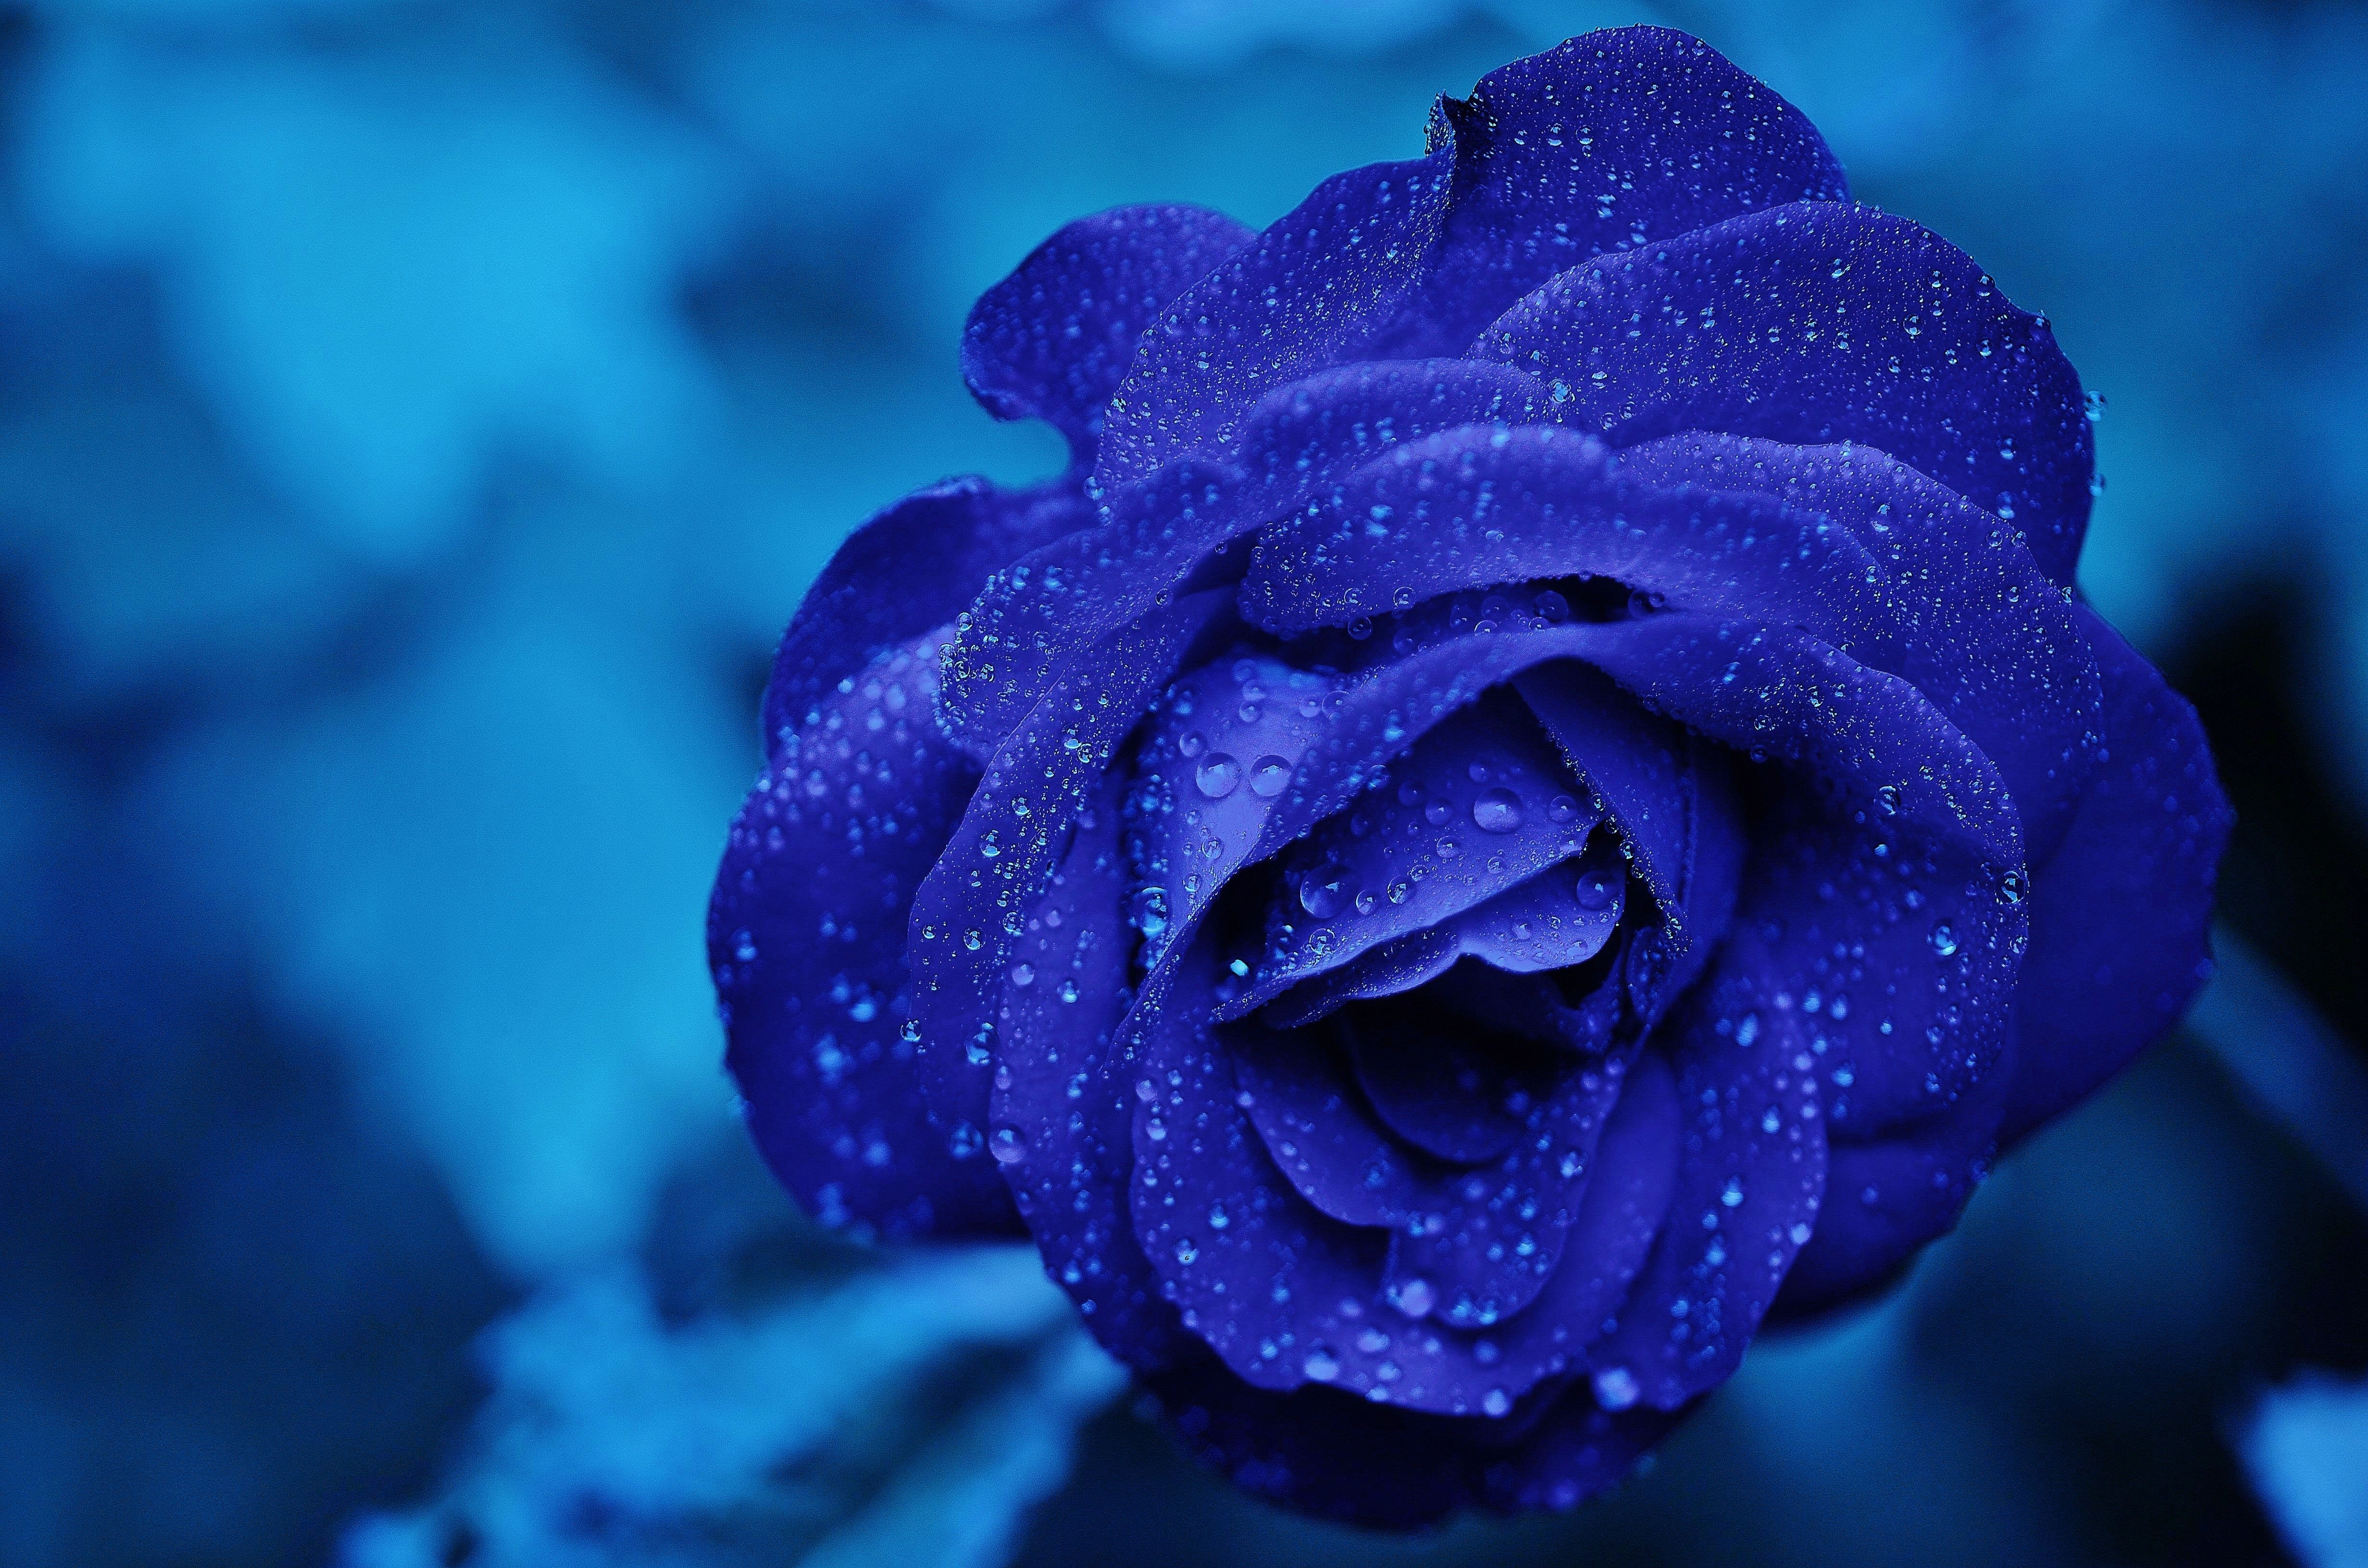 Free photo A blue rose with dewdrops on its petals.